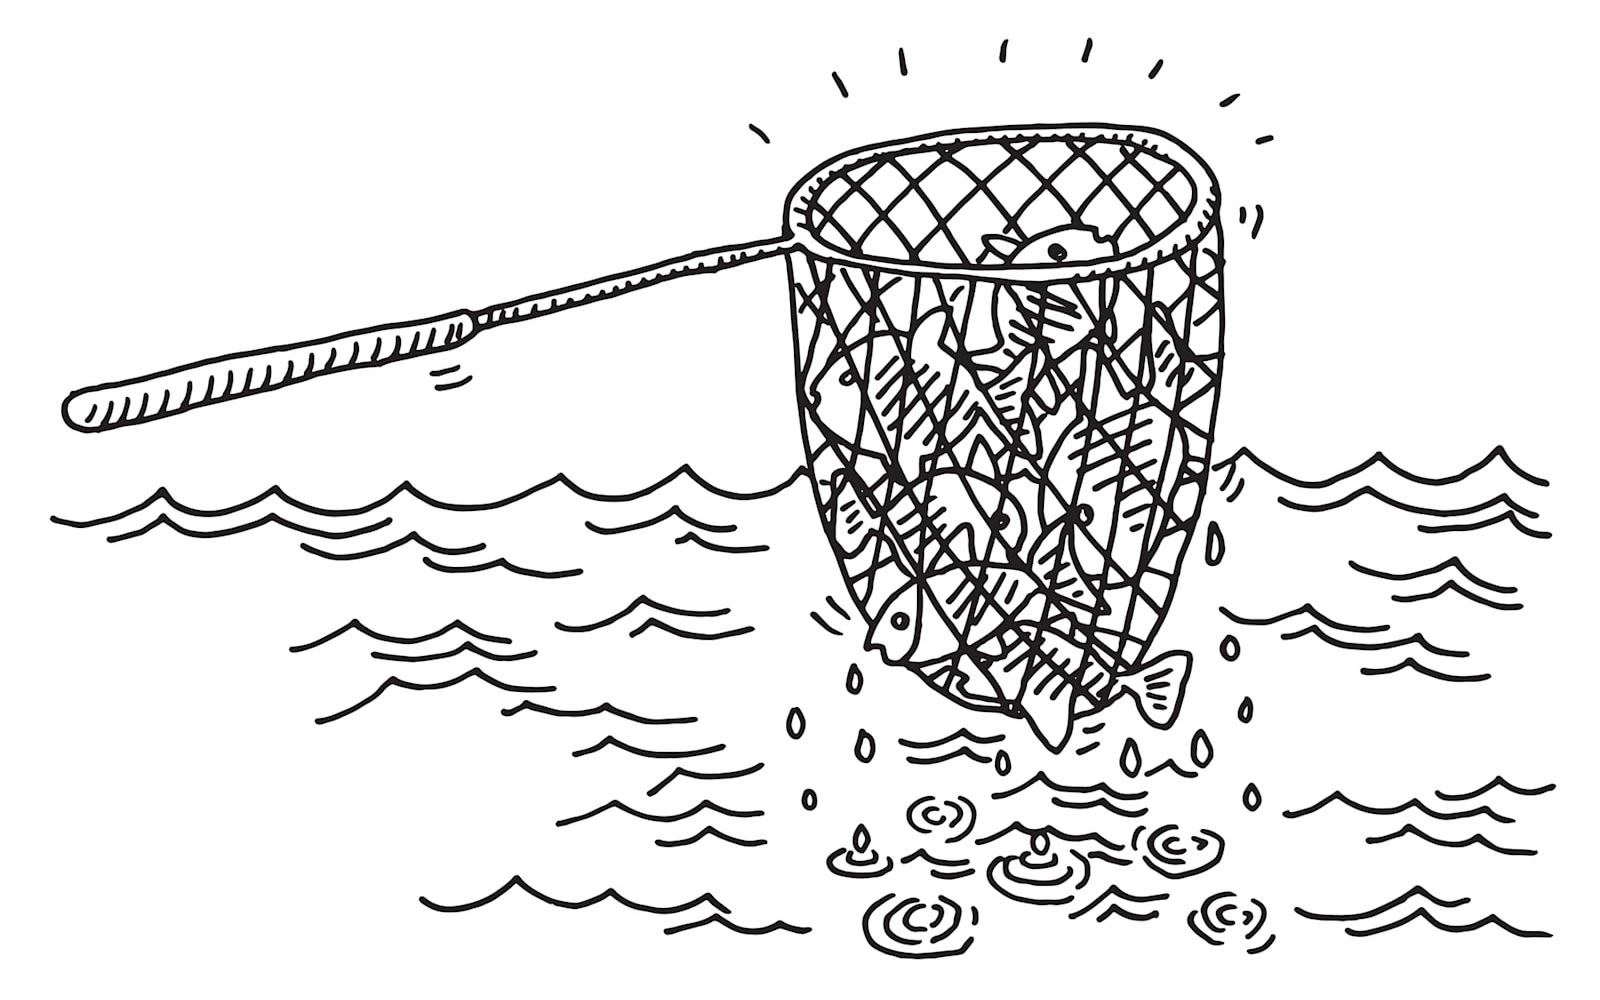 A black and white illustration of a fishing net full of fish, over the ocean